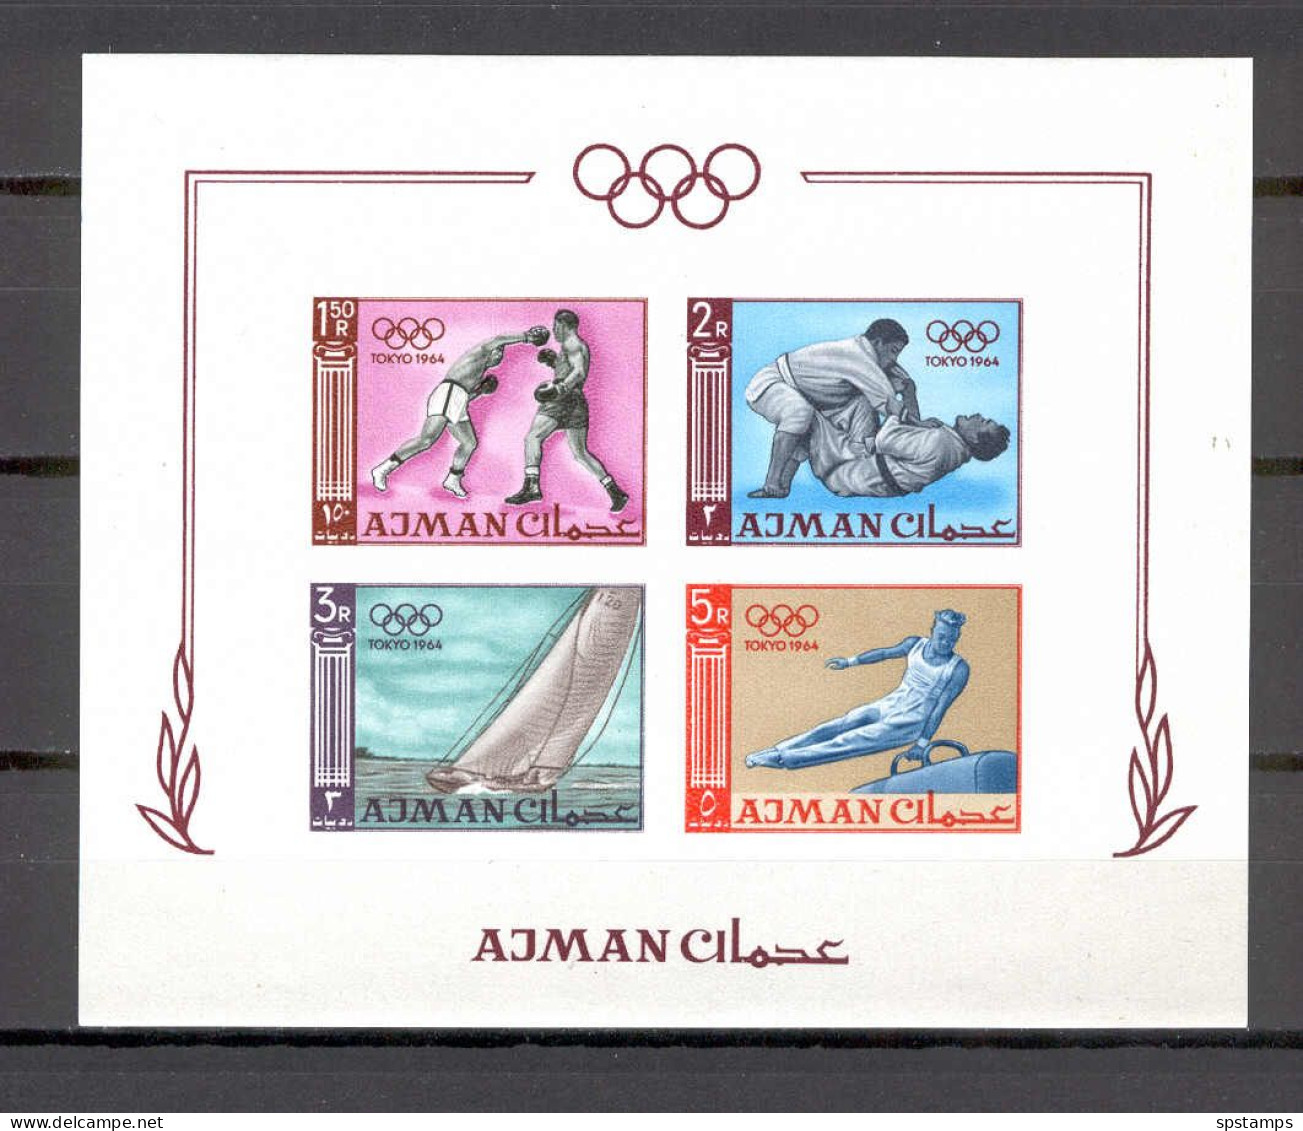 Ajman 1964 Olympic Games TOKYO - IMPERFORATE  MS MNH - Sommer 1964: Tokio